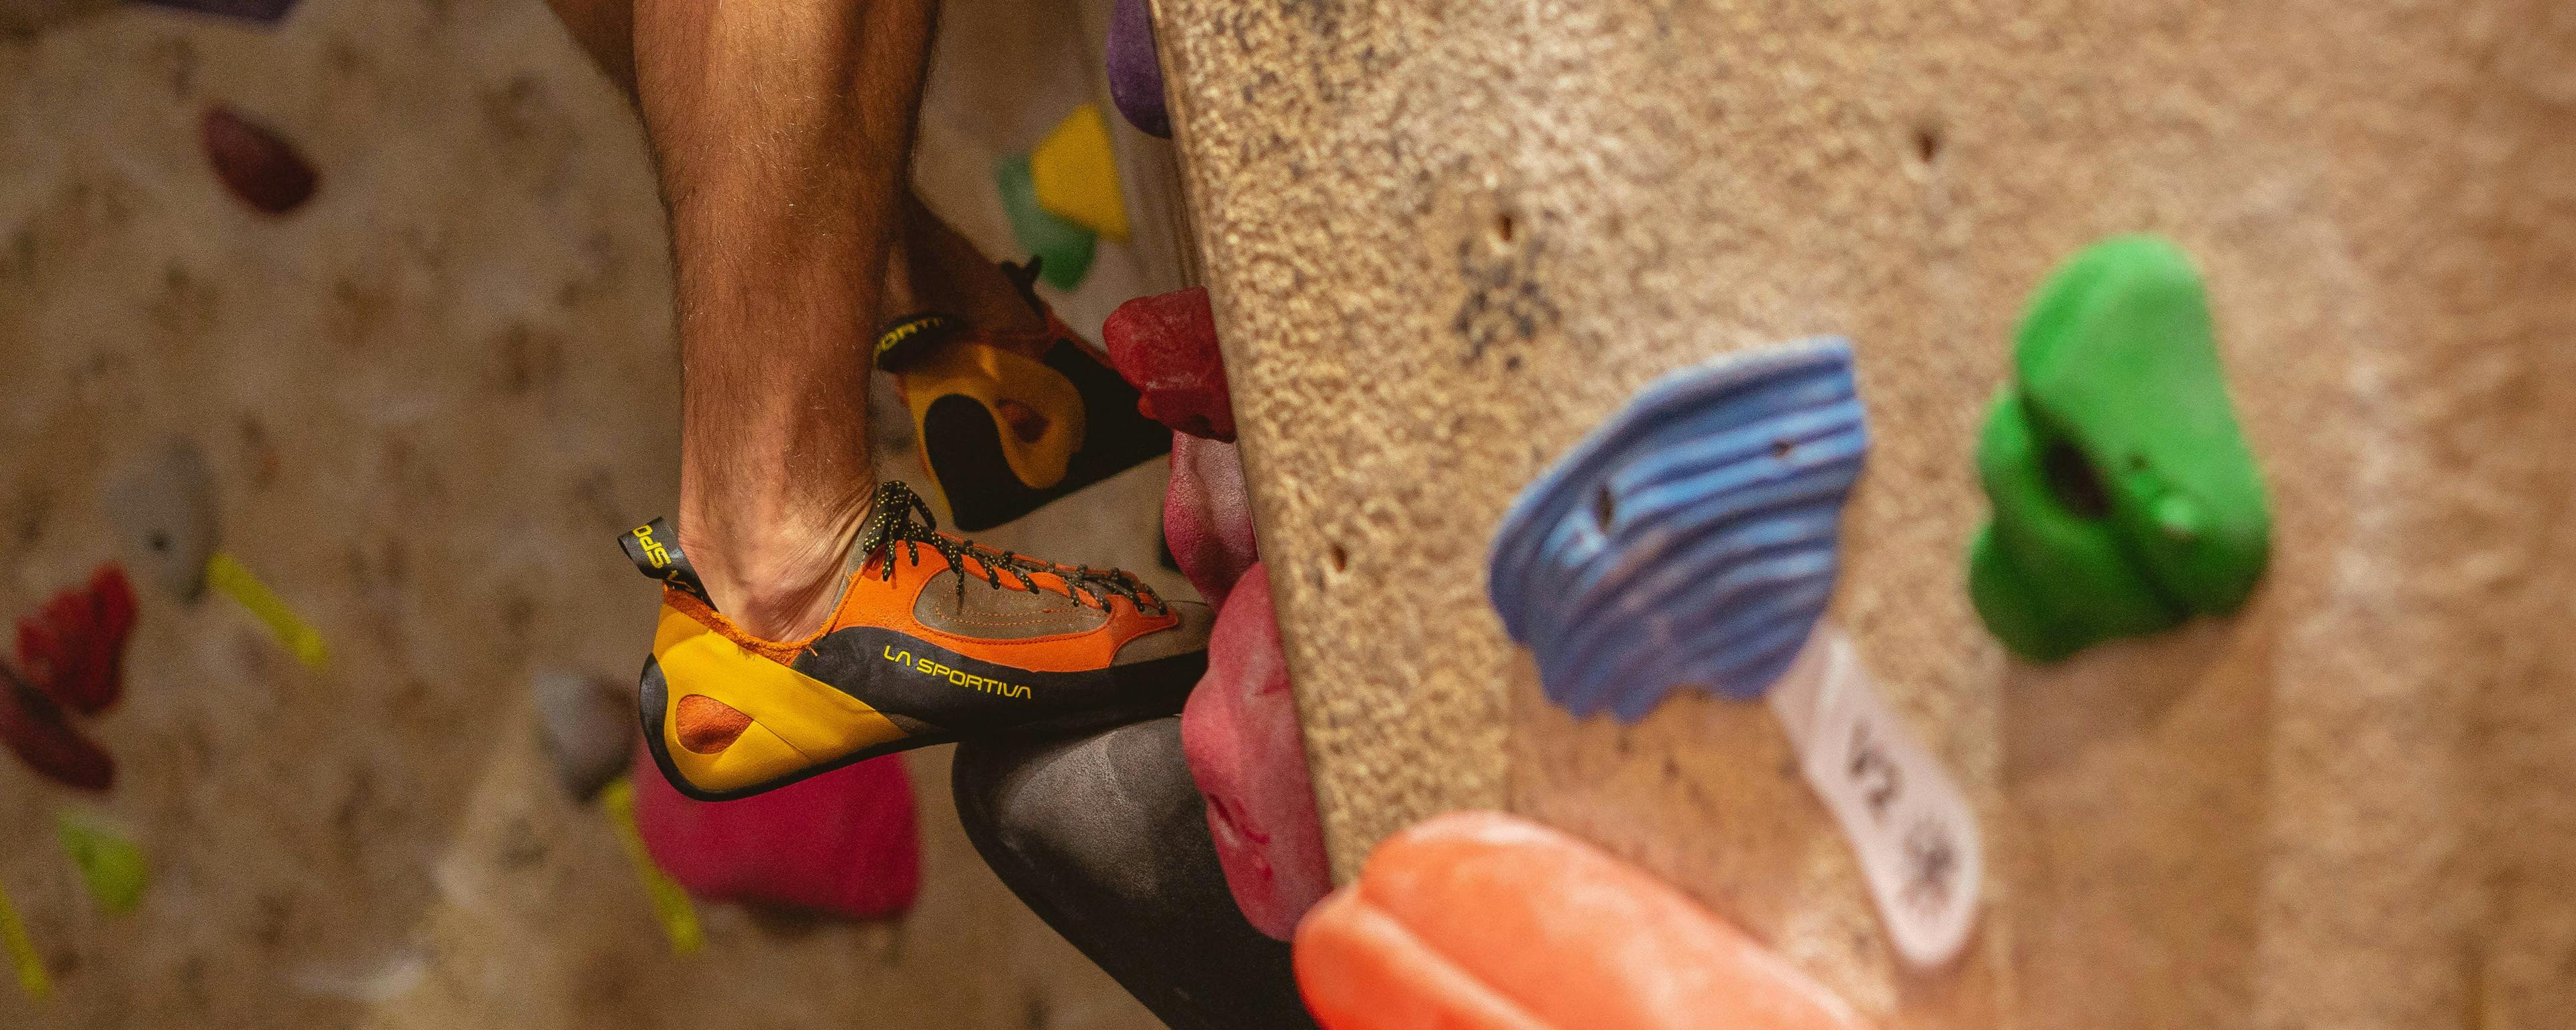 How to choose climbing shoes